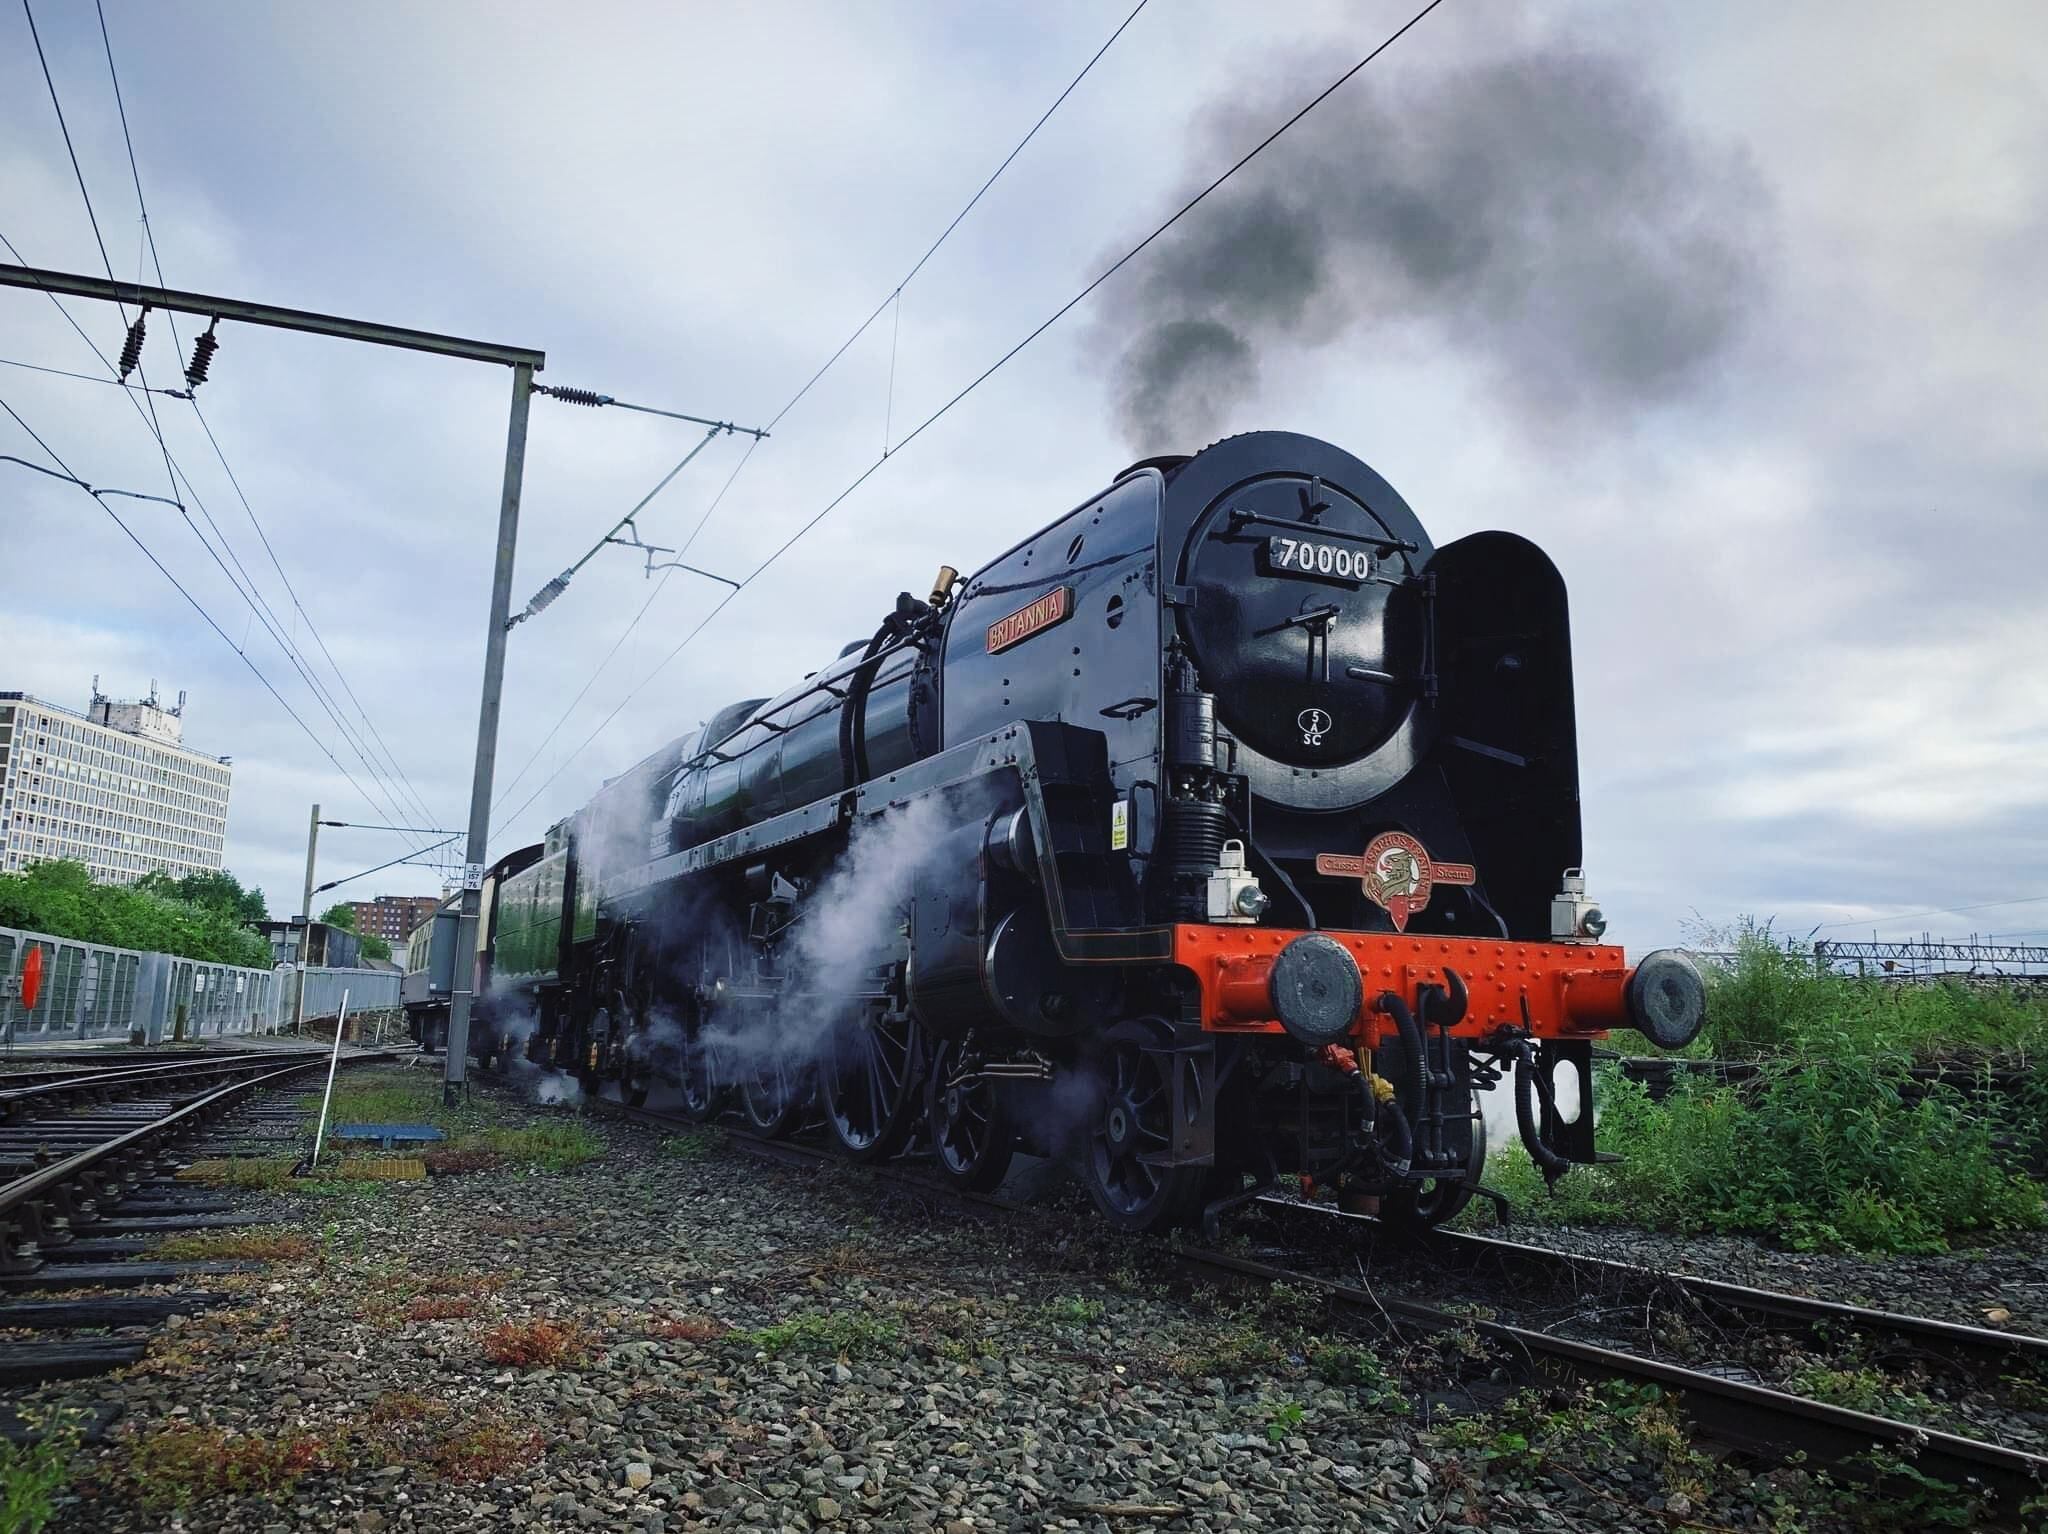 Chance to see steam engine in Black Country and Staffordshire - times for Thursday's journey